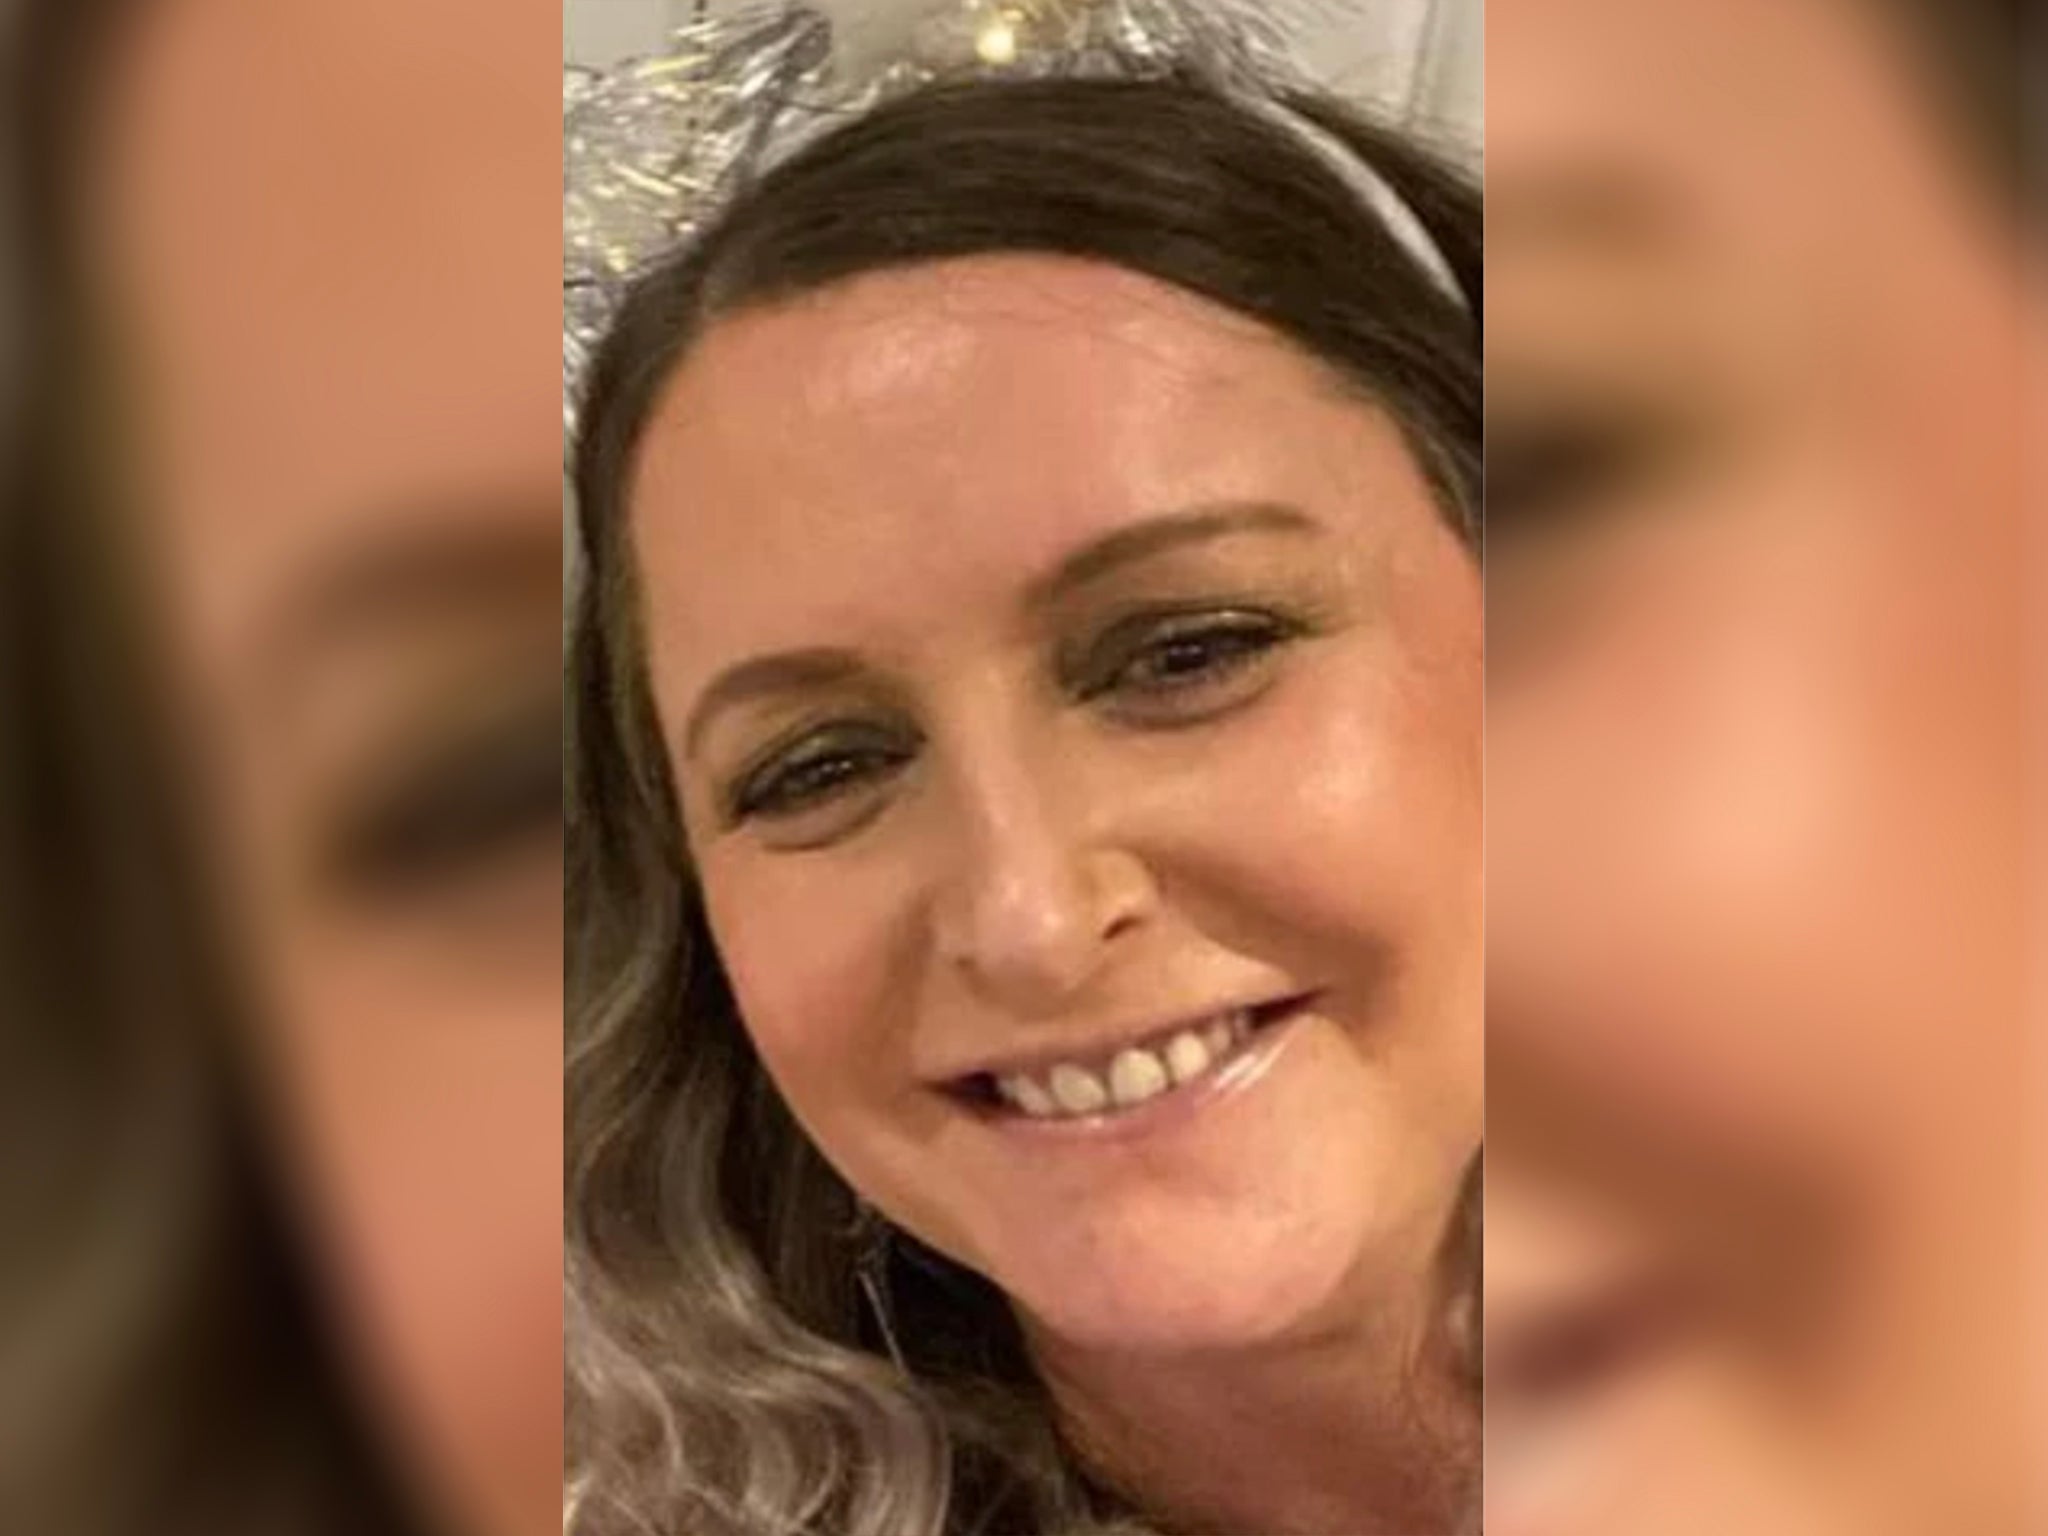 Tracey Wood was last seen on Wednesday 5 October